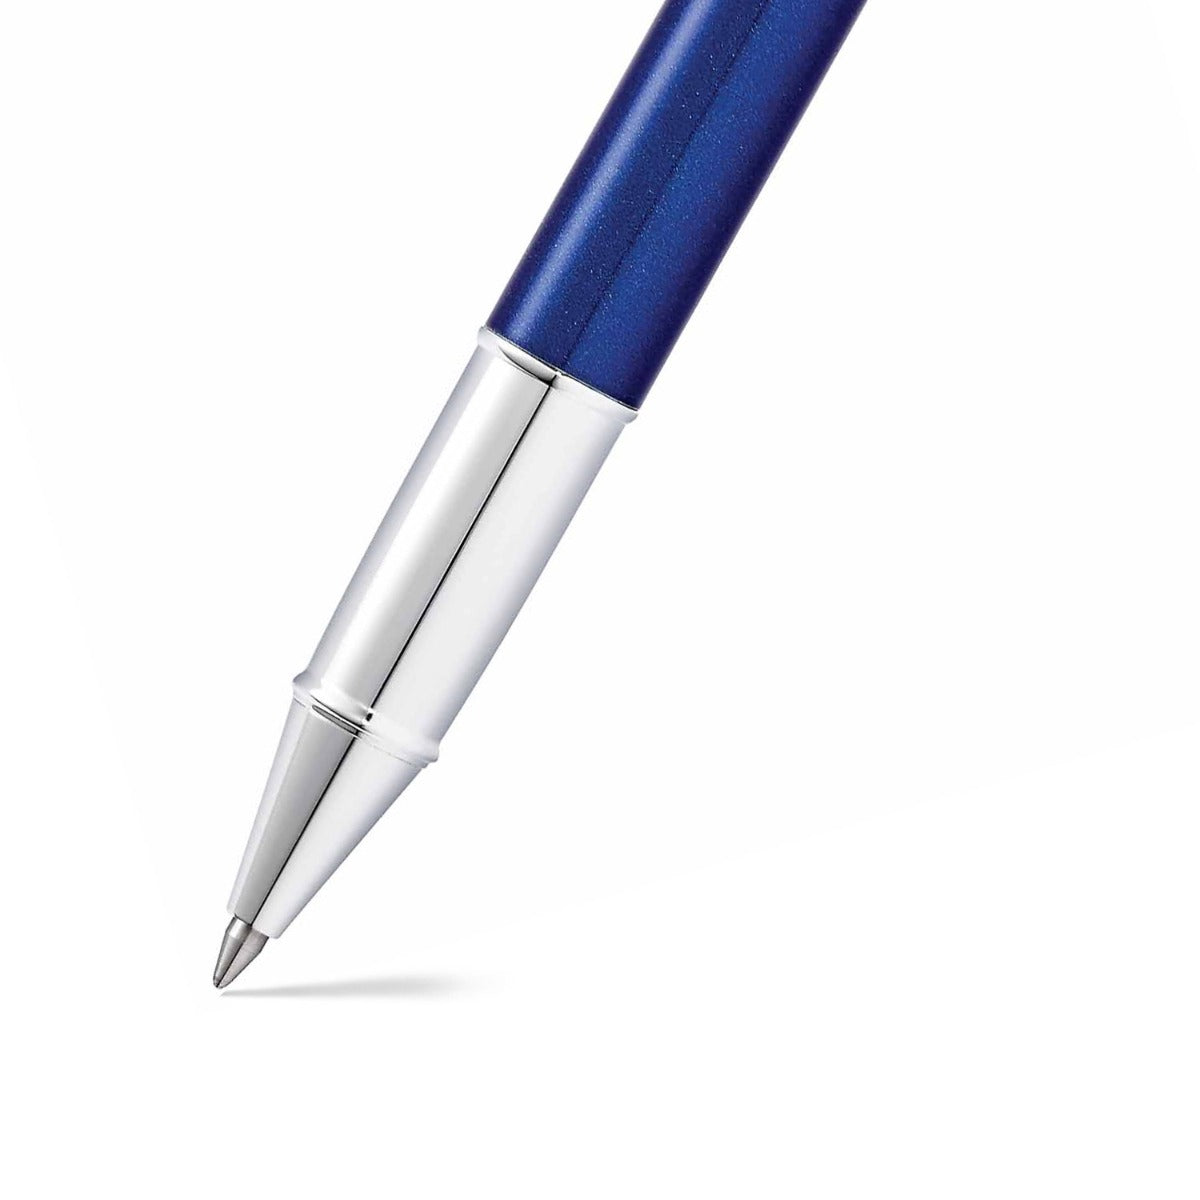 Sheaffer® 100 Glossy Blue with Chrome Trims Rollerball Pen